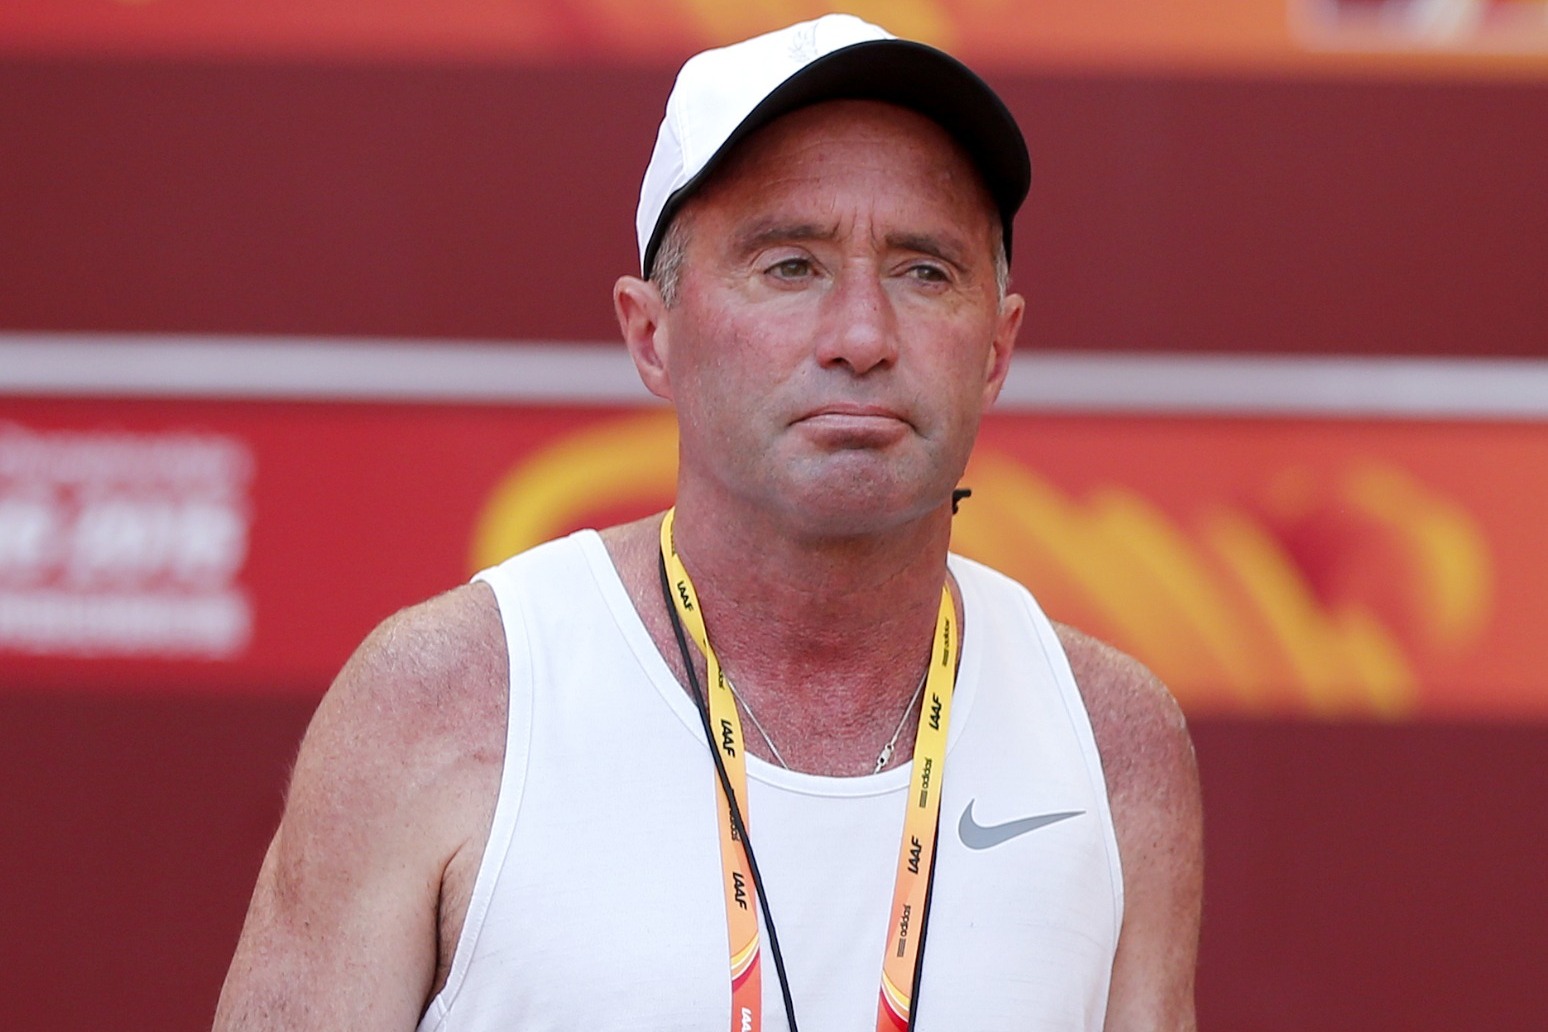 Alberto Salazar’s four-year ban for anti-doping rule violations upheld by CAS 